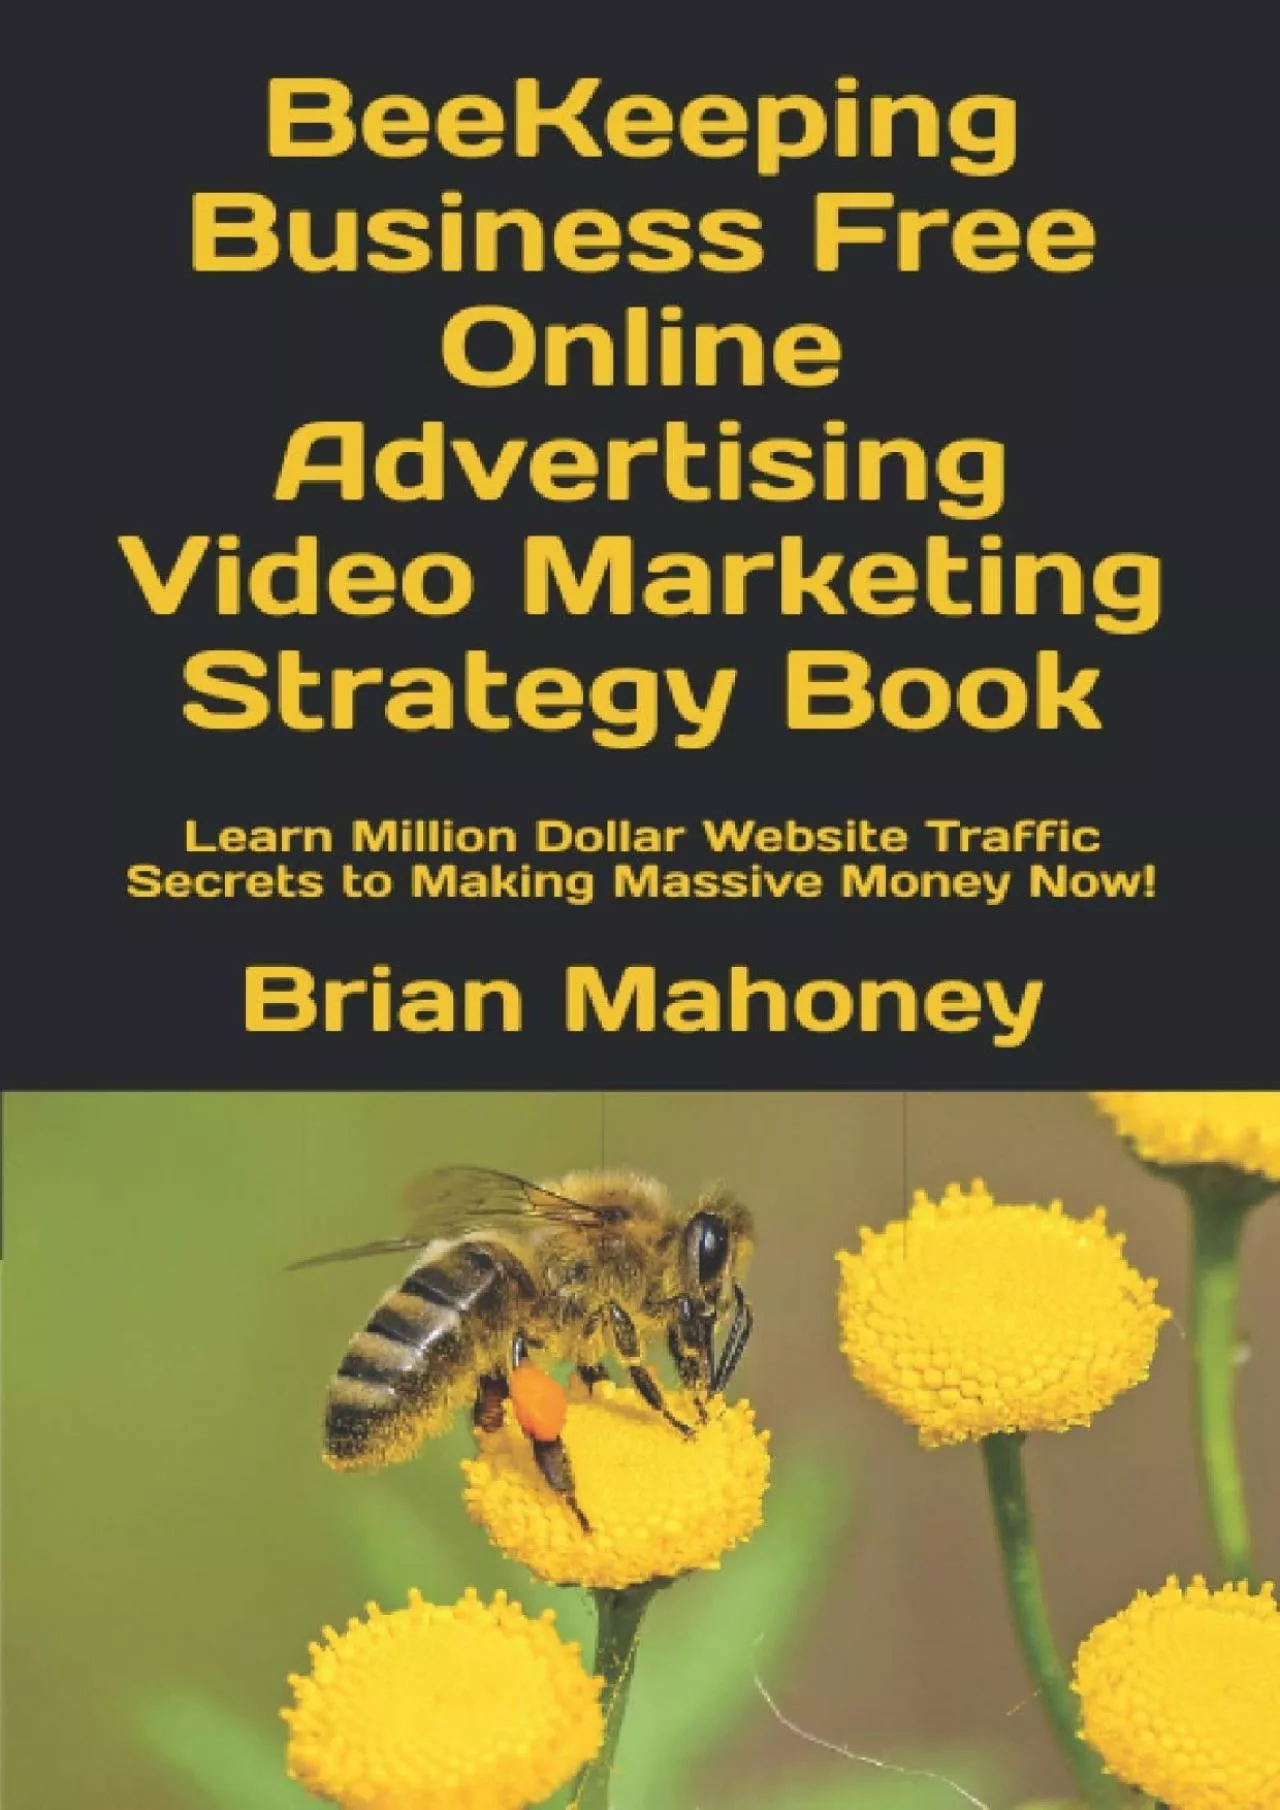 BeeKeeping Business Free Online Advertising Video Marketing Strategy Book: Learn Million